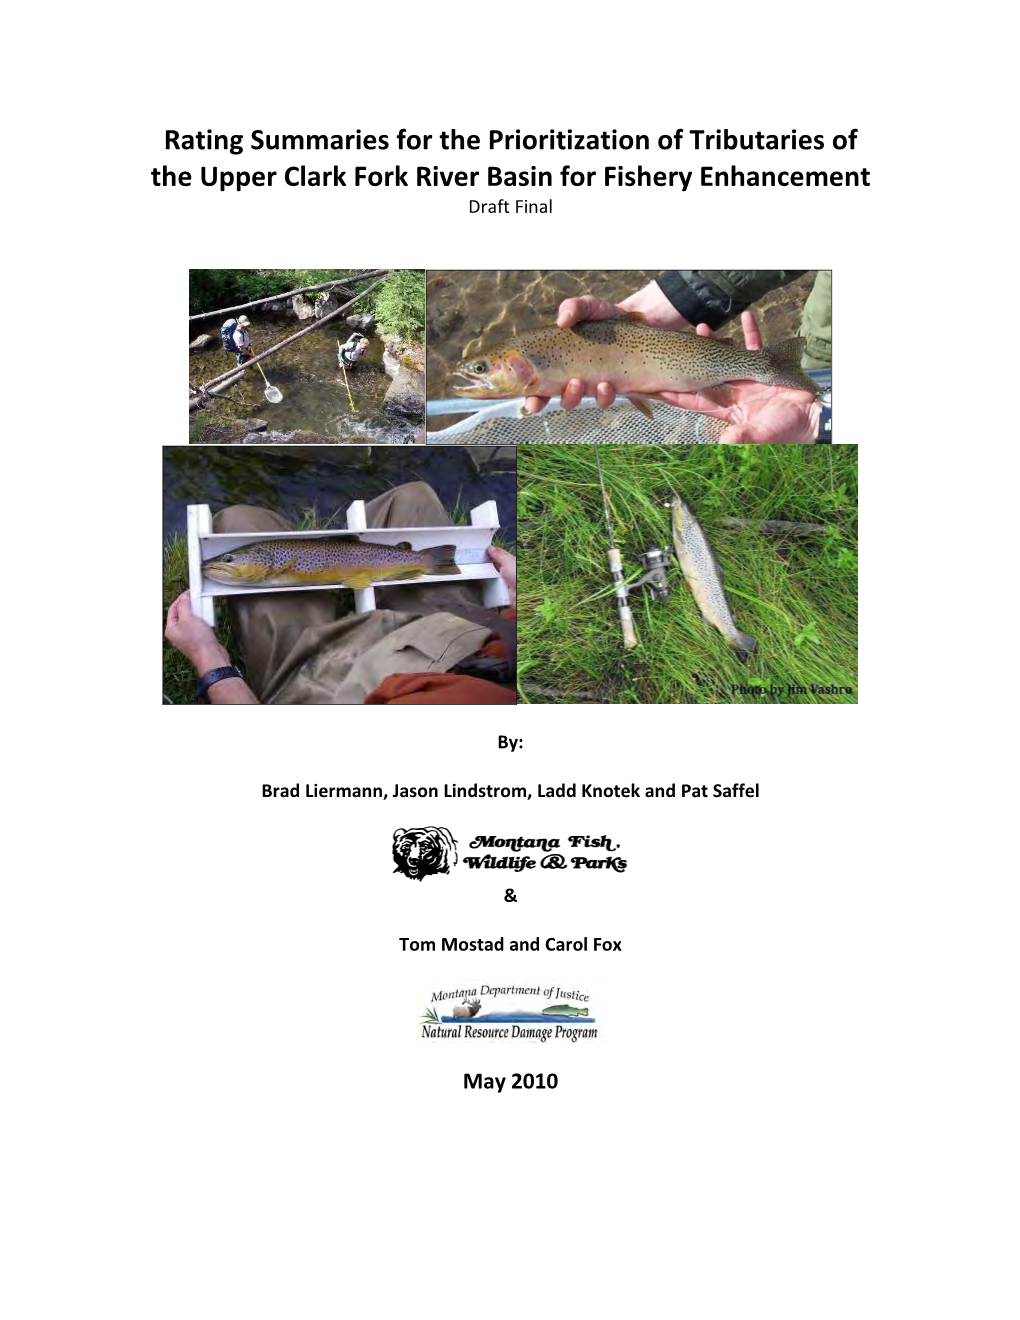 Rating Summaries for the Prioritization of Tributaries of Upper Clark Fork River Basin for Fishery Enhancement